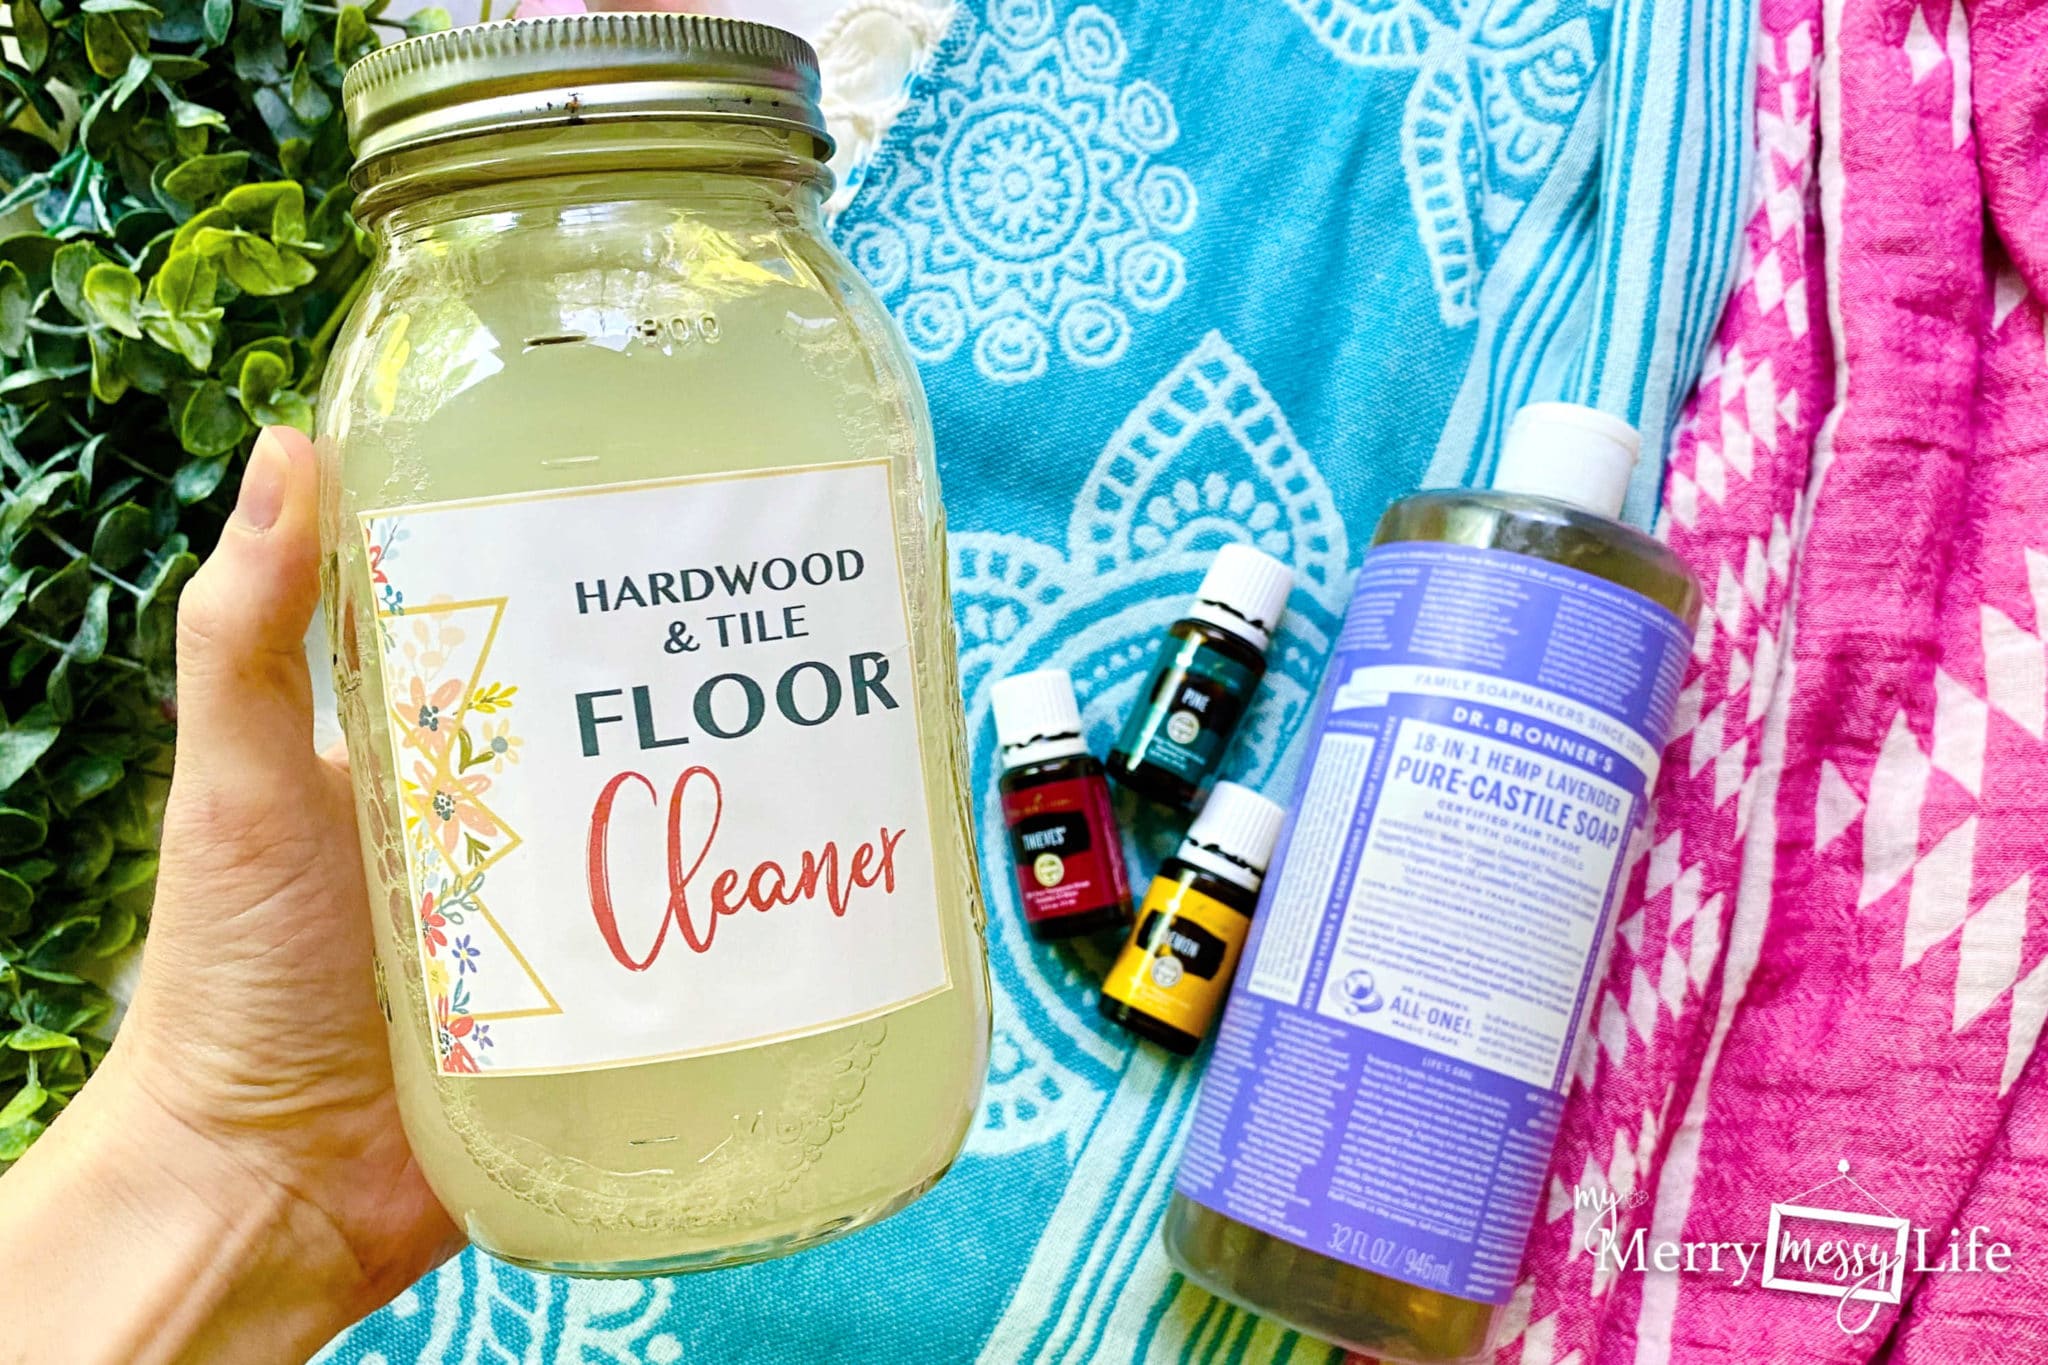 DIY Hardwood and Tile Floor Cleaner with Castile soap and essential oils plus two other recipes!